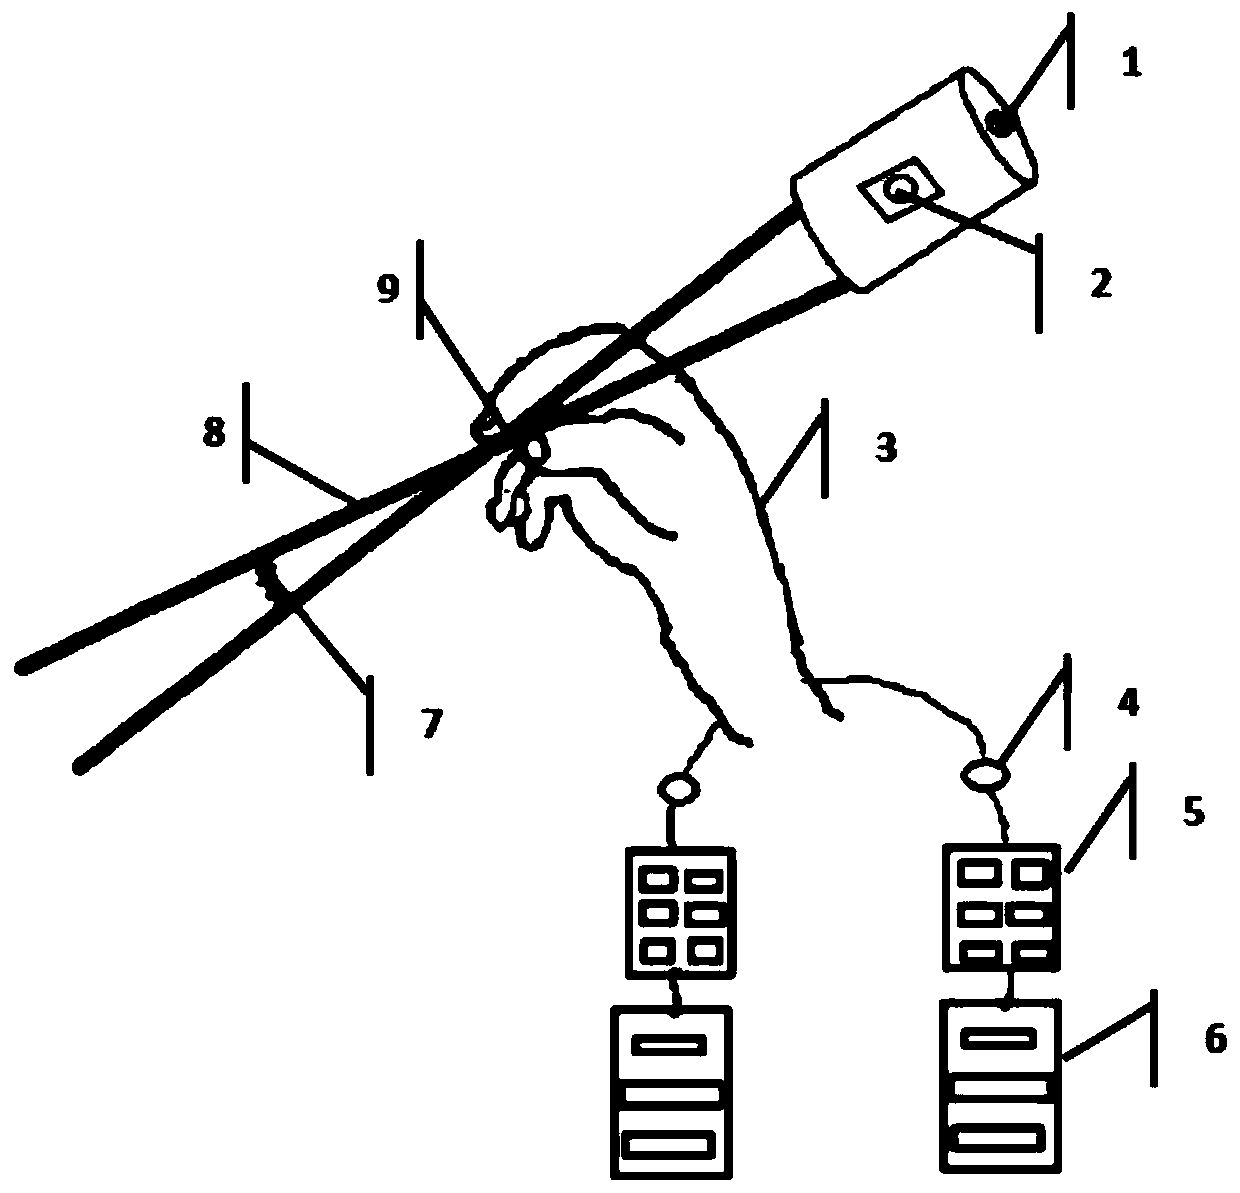 Electromyographic chopsticks applicable to disabled user